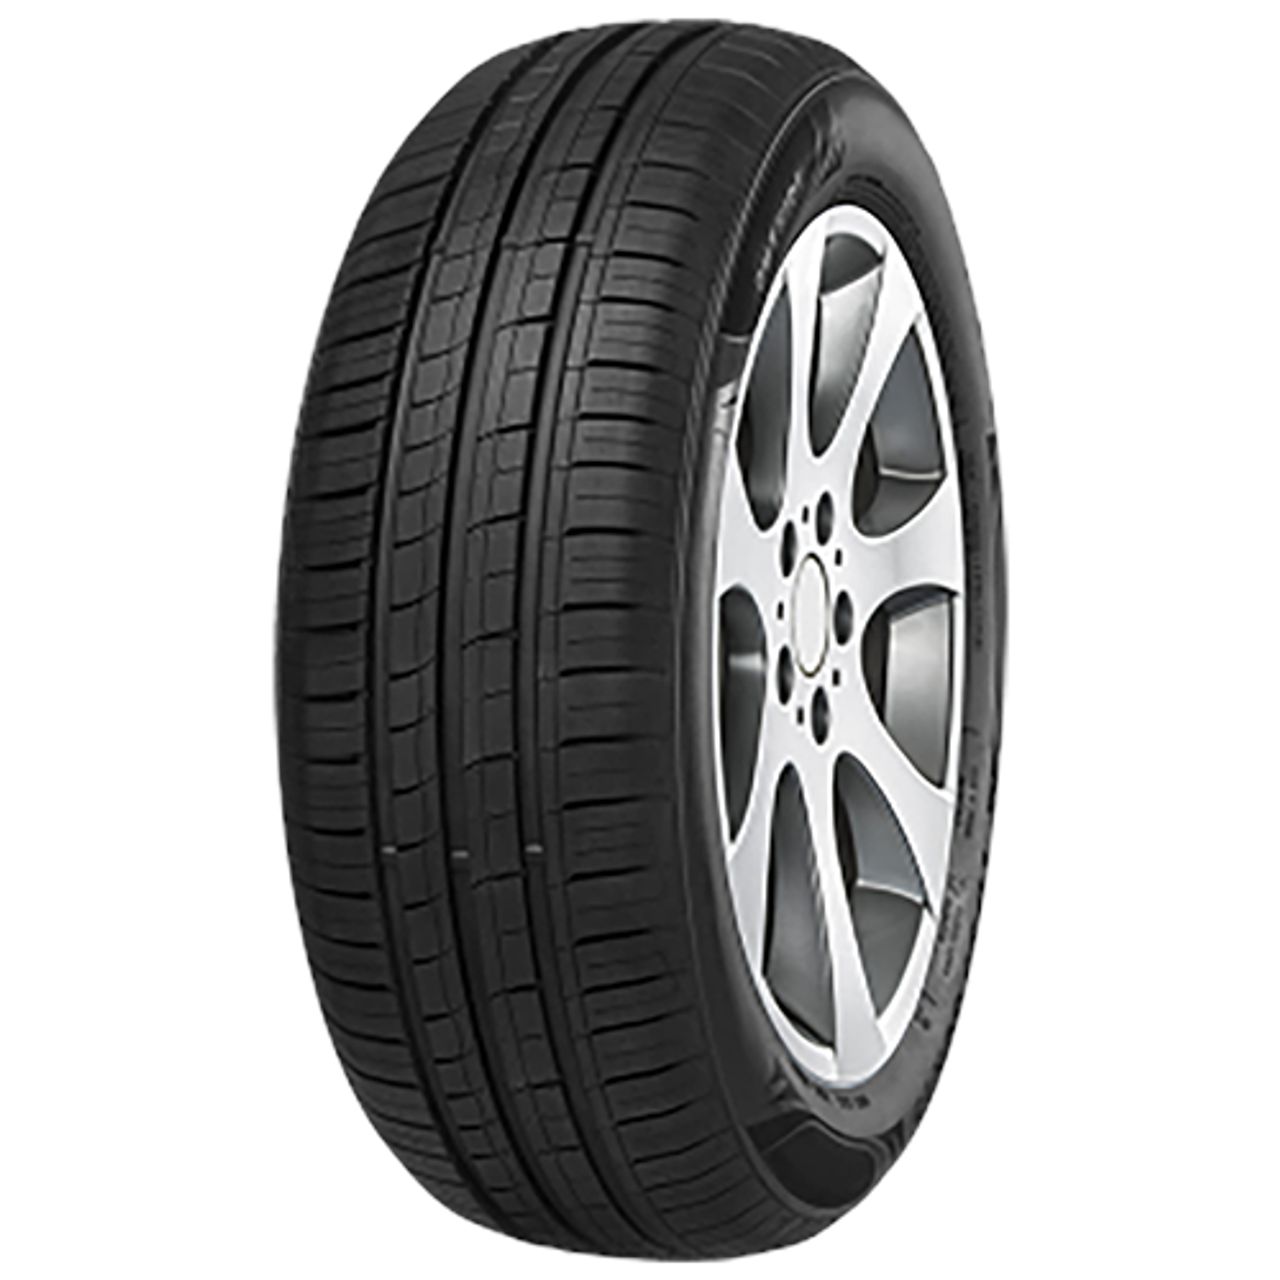 IMPERIAL ECODRIVER 4 175/70R14 84T 